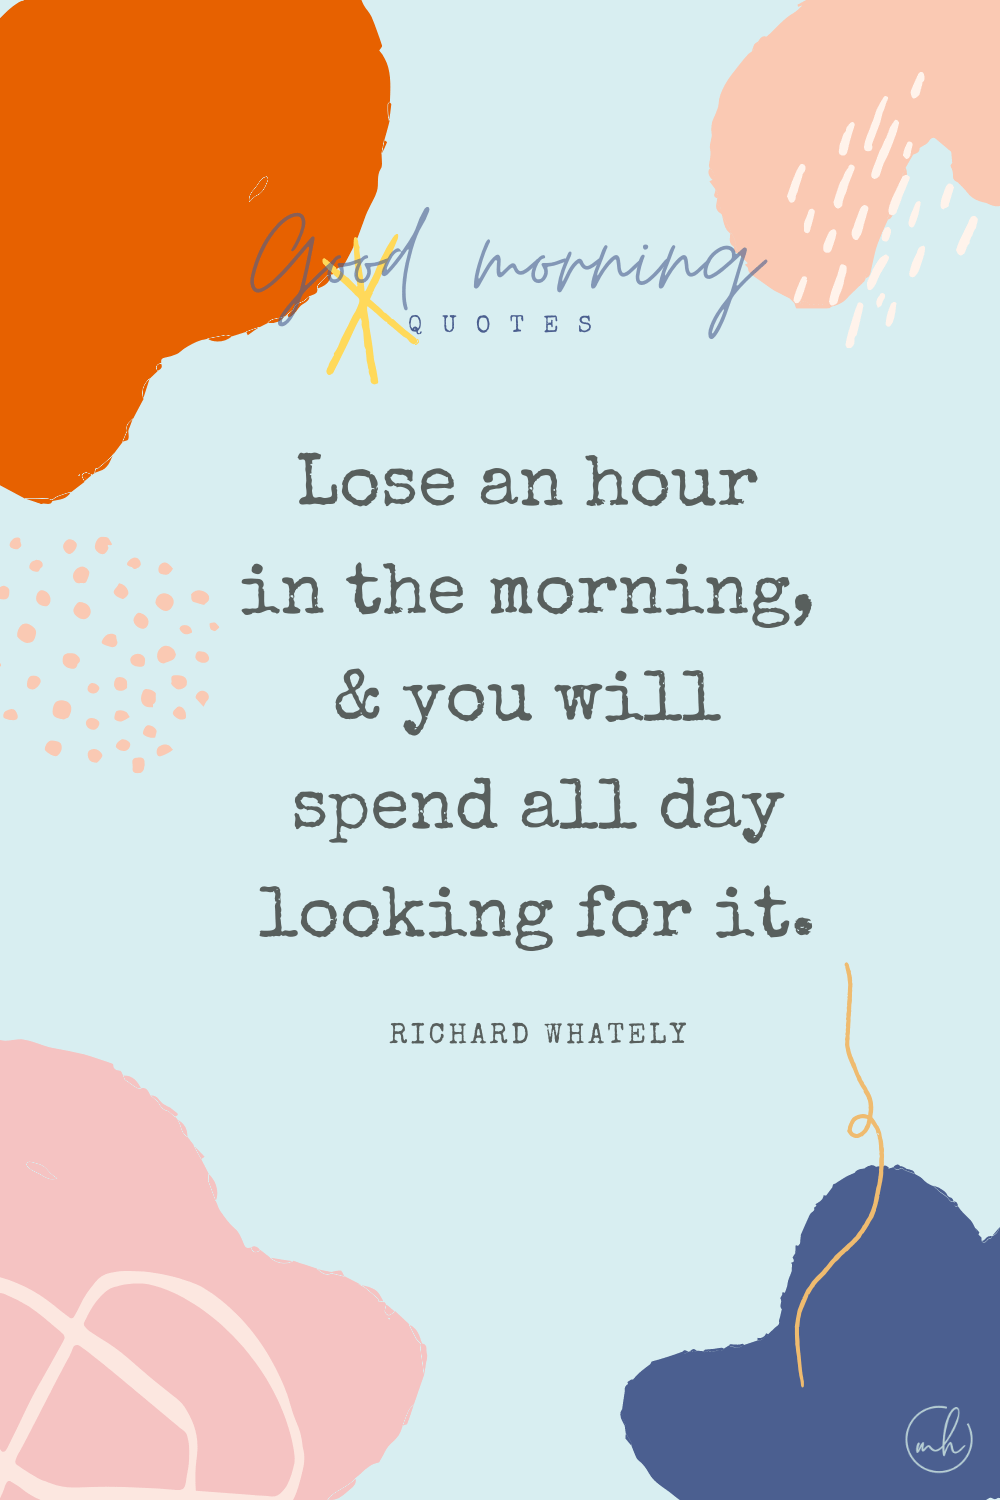 "Lose an hour in the morning, and you will spend all day looking for it." – Richard Whately